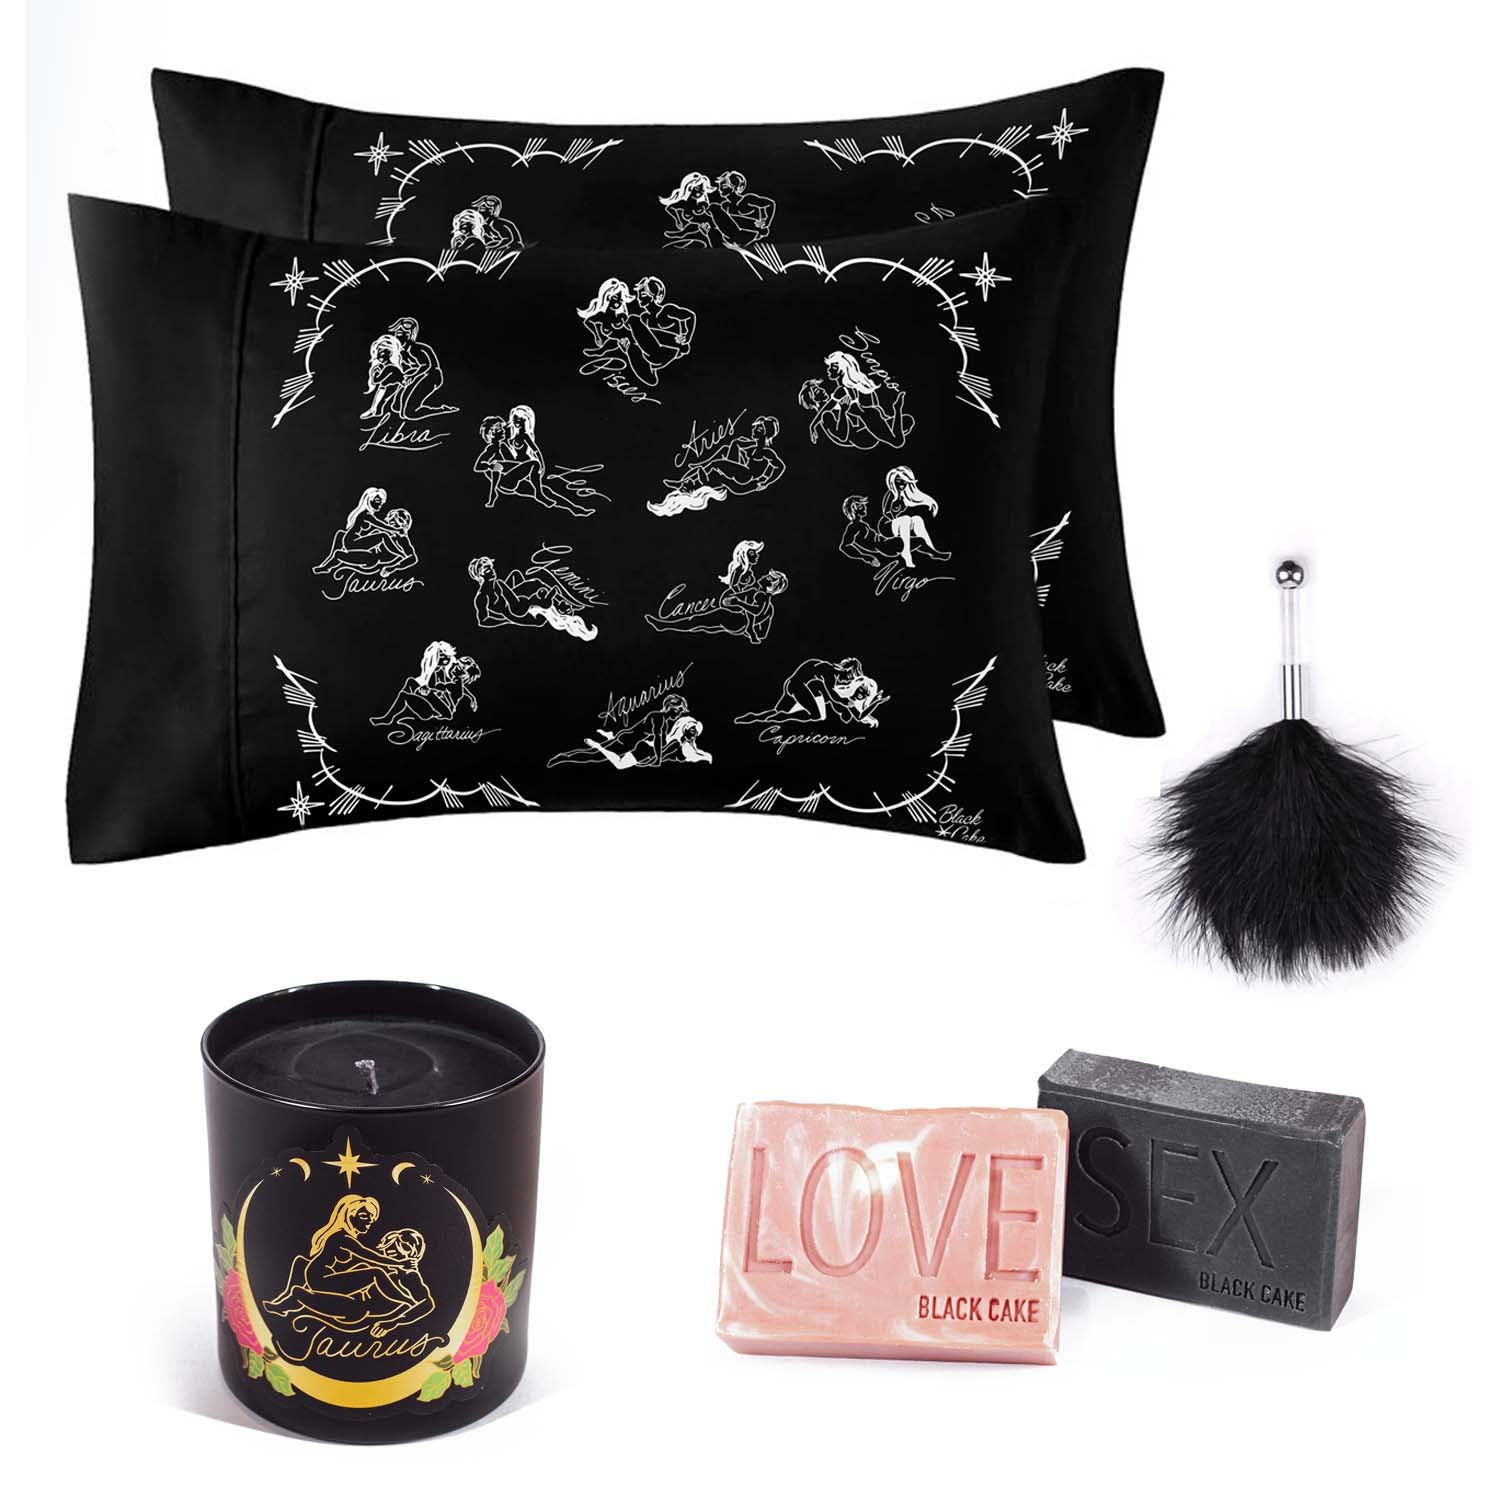 Valentine Day Zodiac Horoscope Love Pillowcase, Soap, Candle Playdate Gift Sets